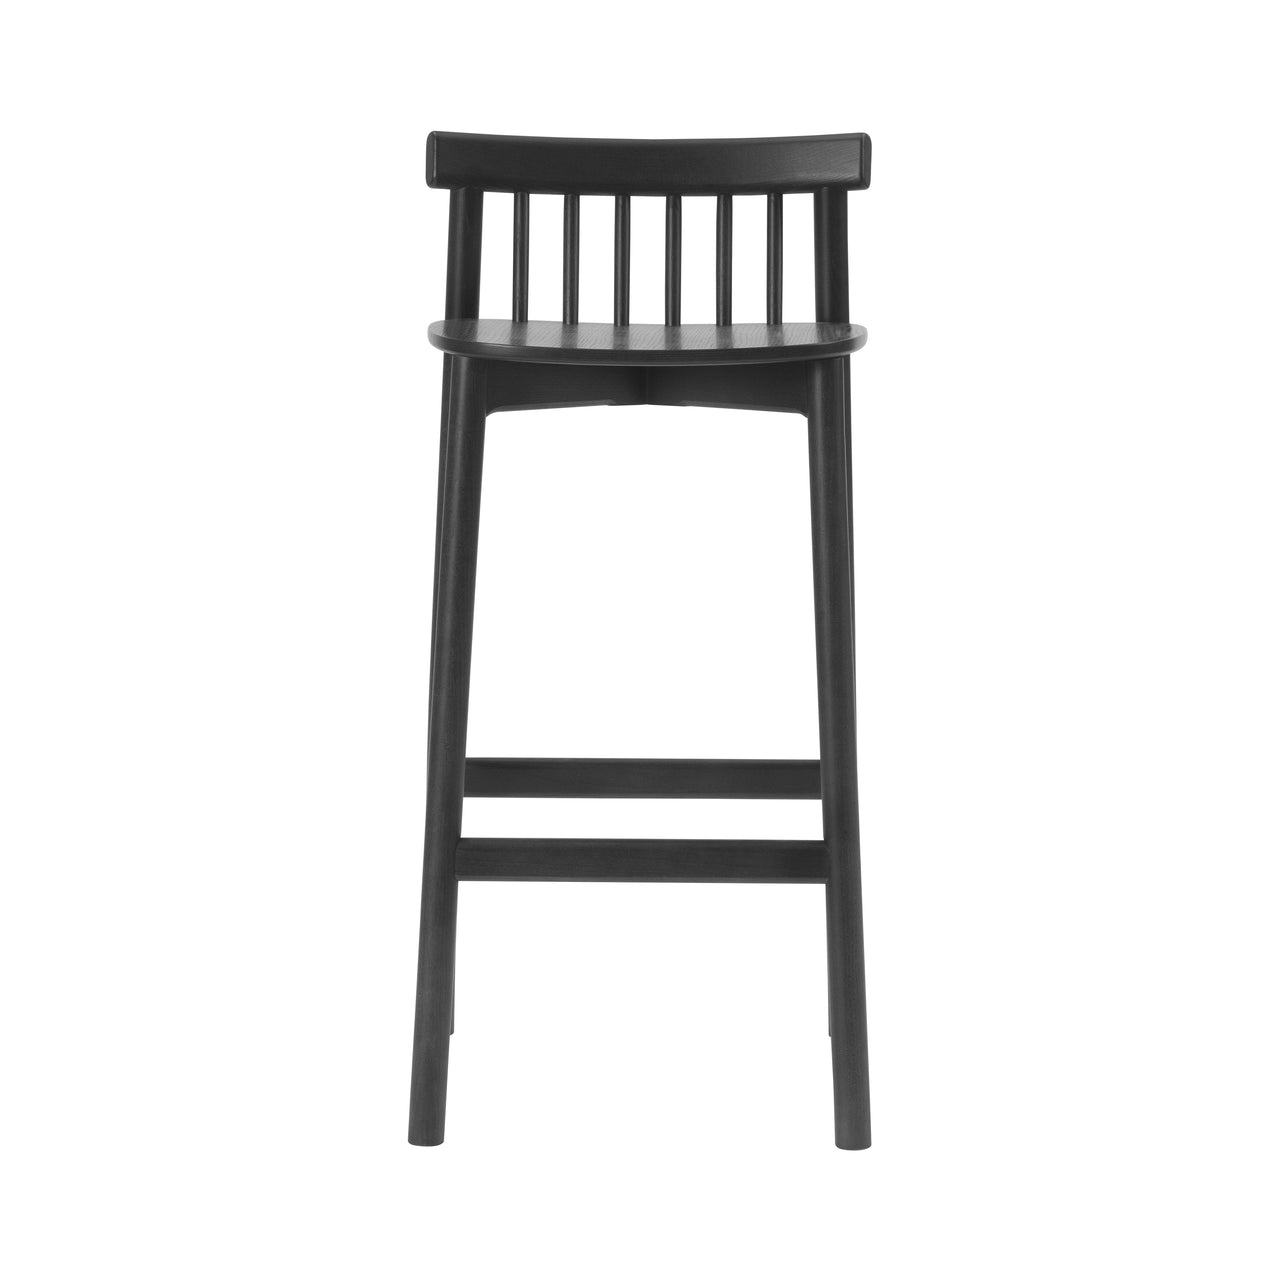 Pind Bar + Counter Stool: Bar + Black Stained Ash